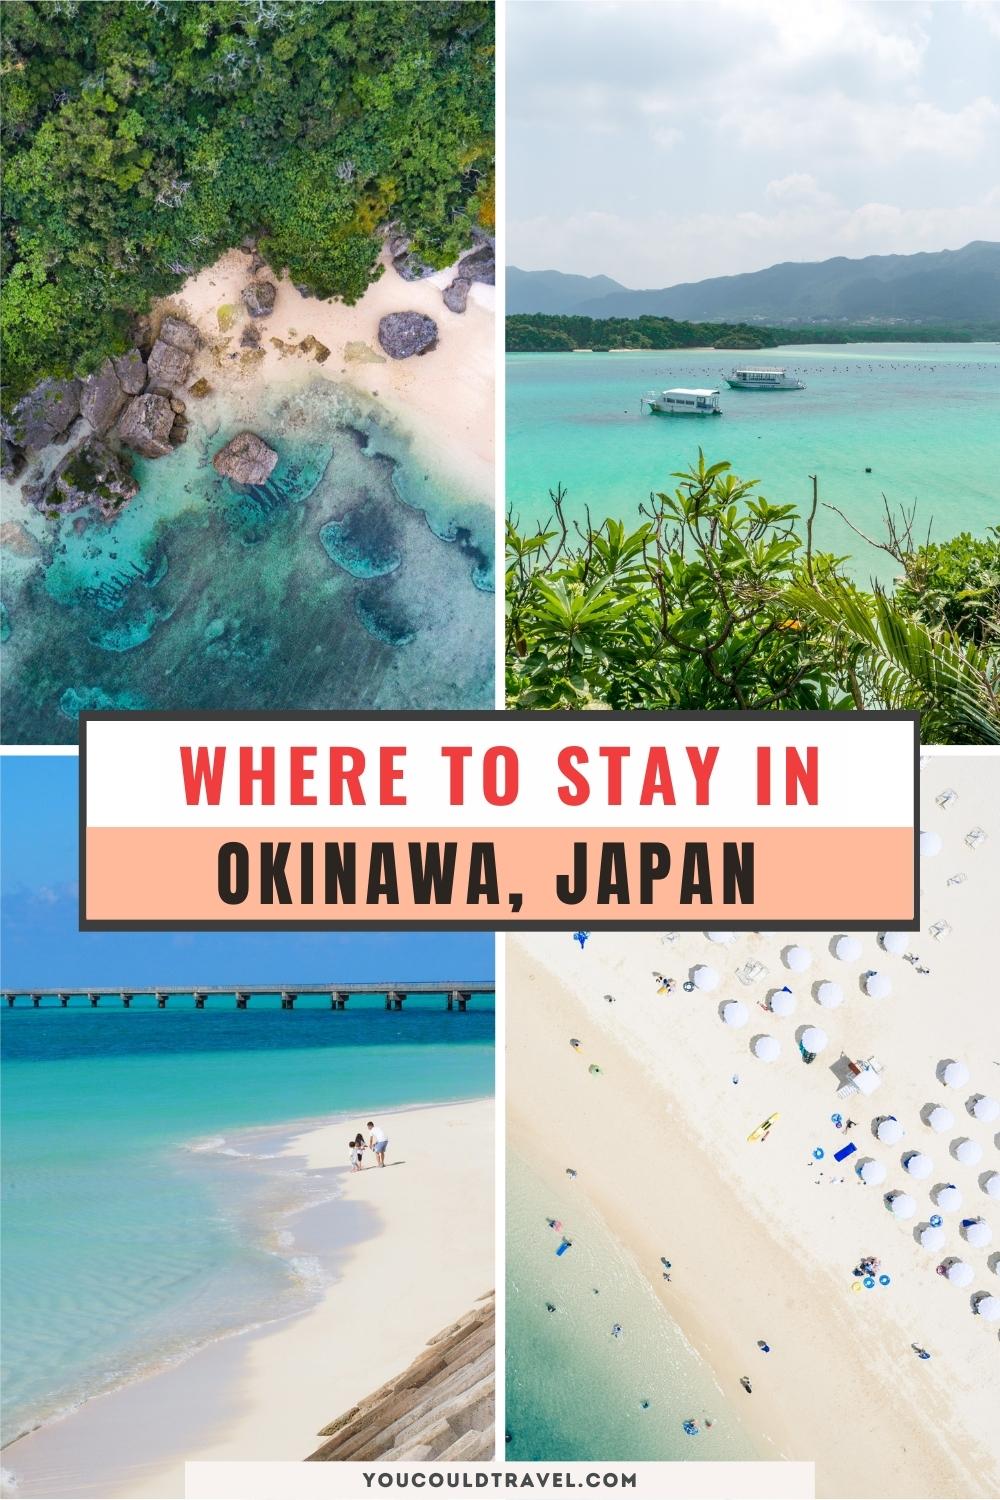 Where to stay in Okinawa Japan